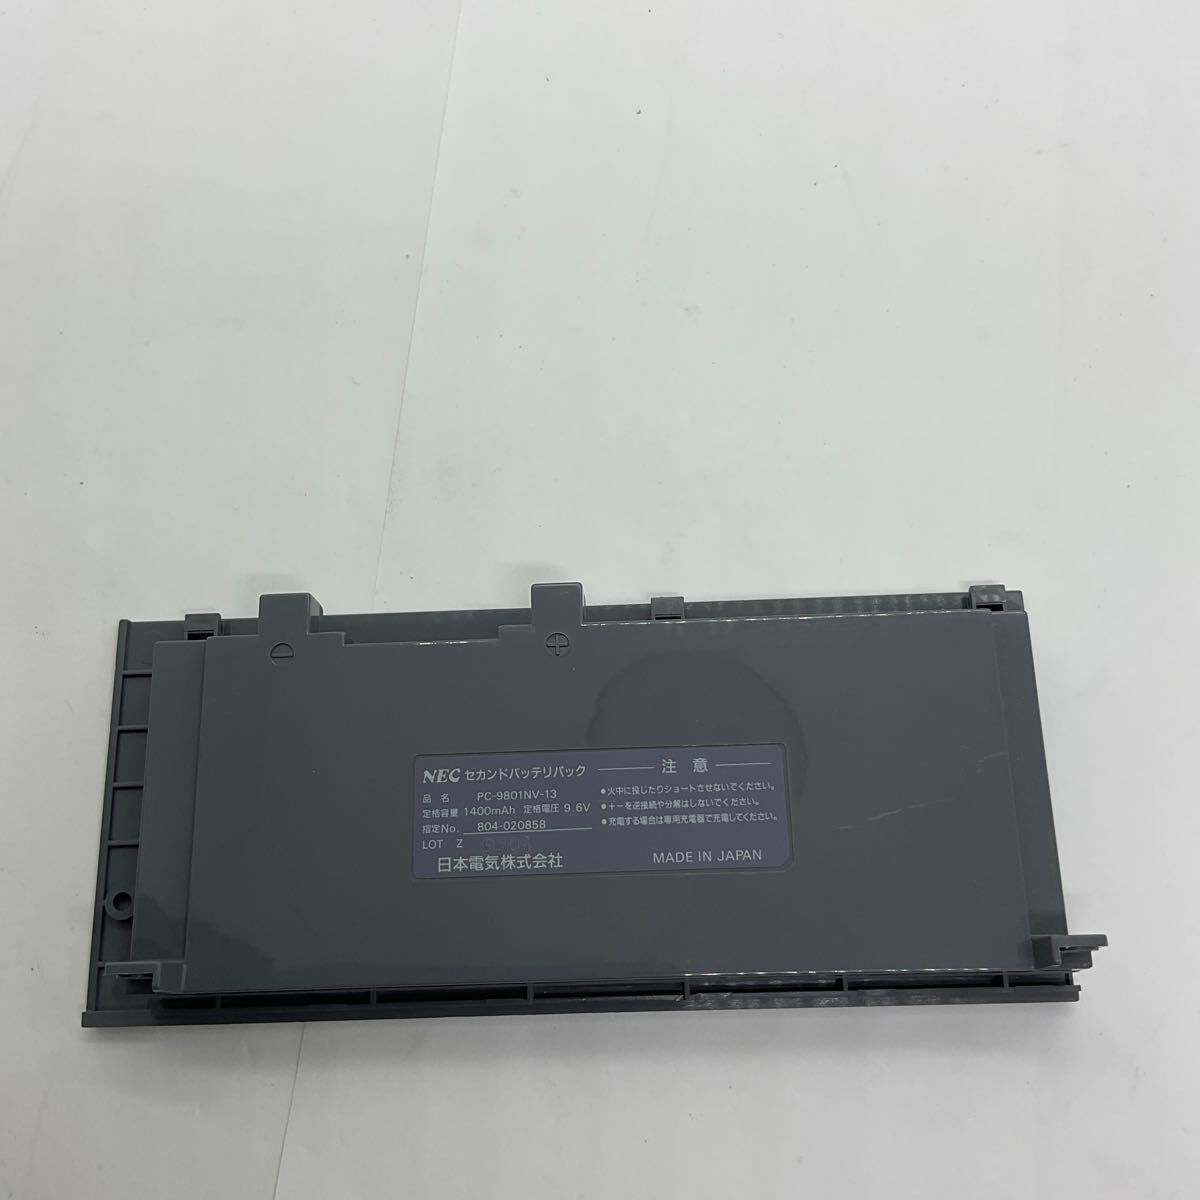 *(51-7) PC-9801NV-13 PC-98 Note for 2nd battery pack used 